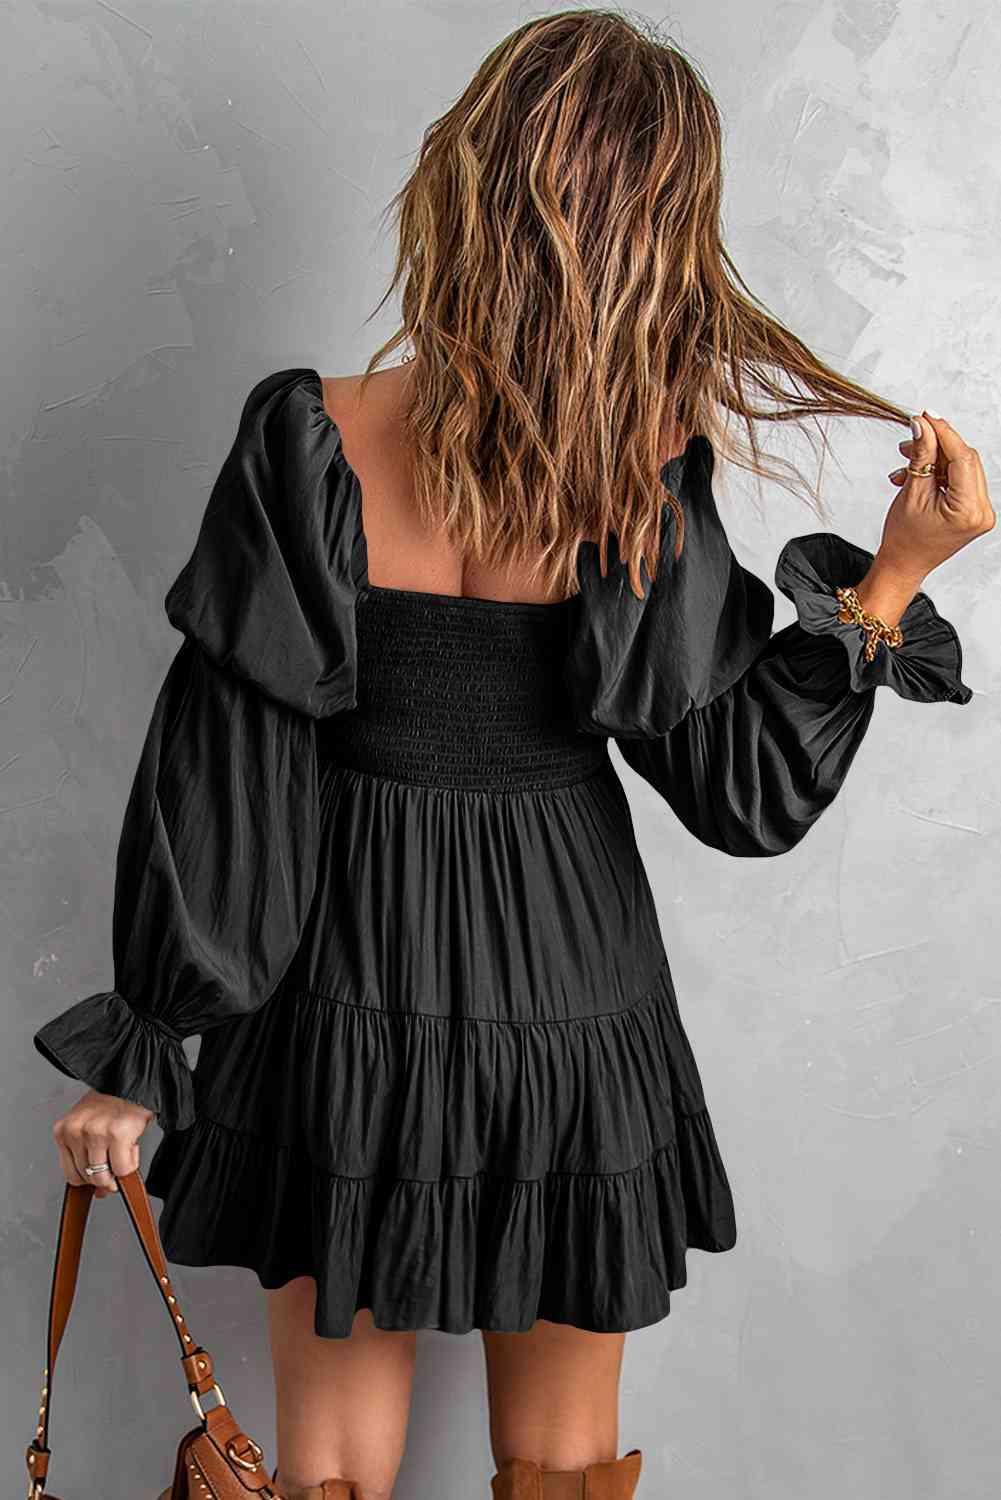 Smocked Off-Shoulder Tiered Mini Dress-Dresses-Boutique Dress, Dress, Ship From Overseas, SYNZ-Black-S-[option4]-[option5]-[option6]-Womens-USA-Clothing-Boutique-Shop-Online-Clothes Minded